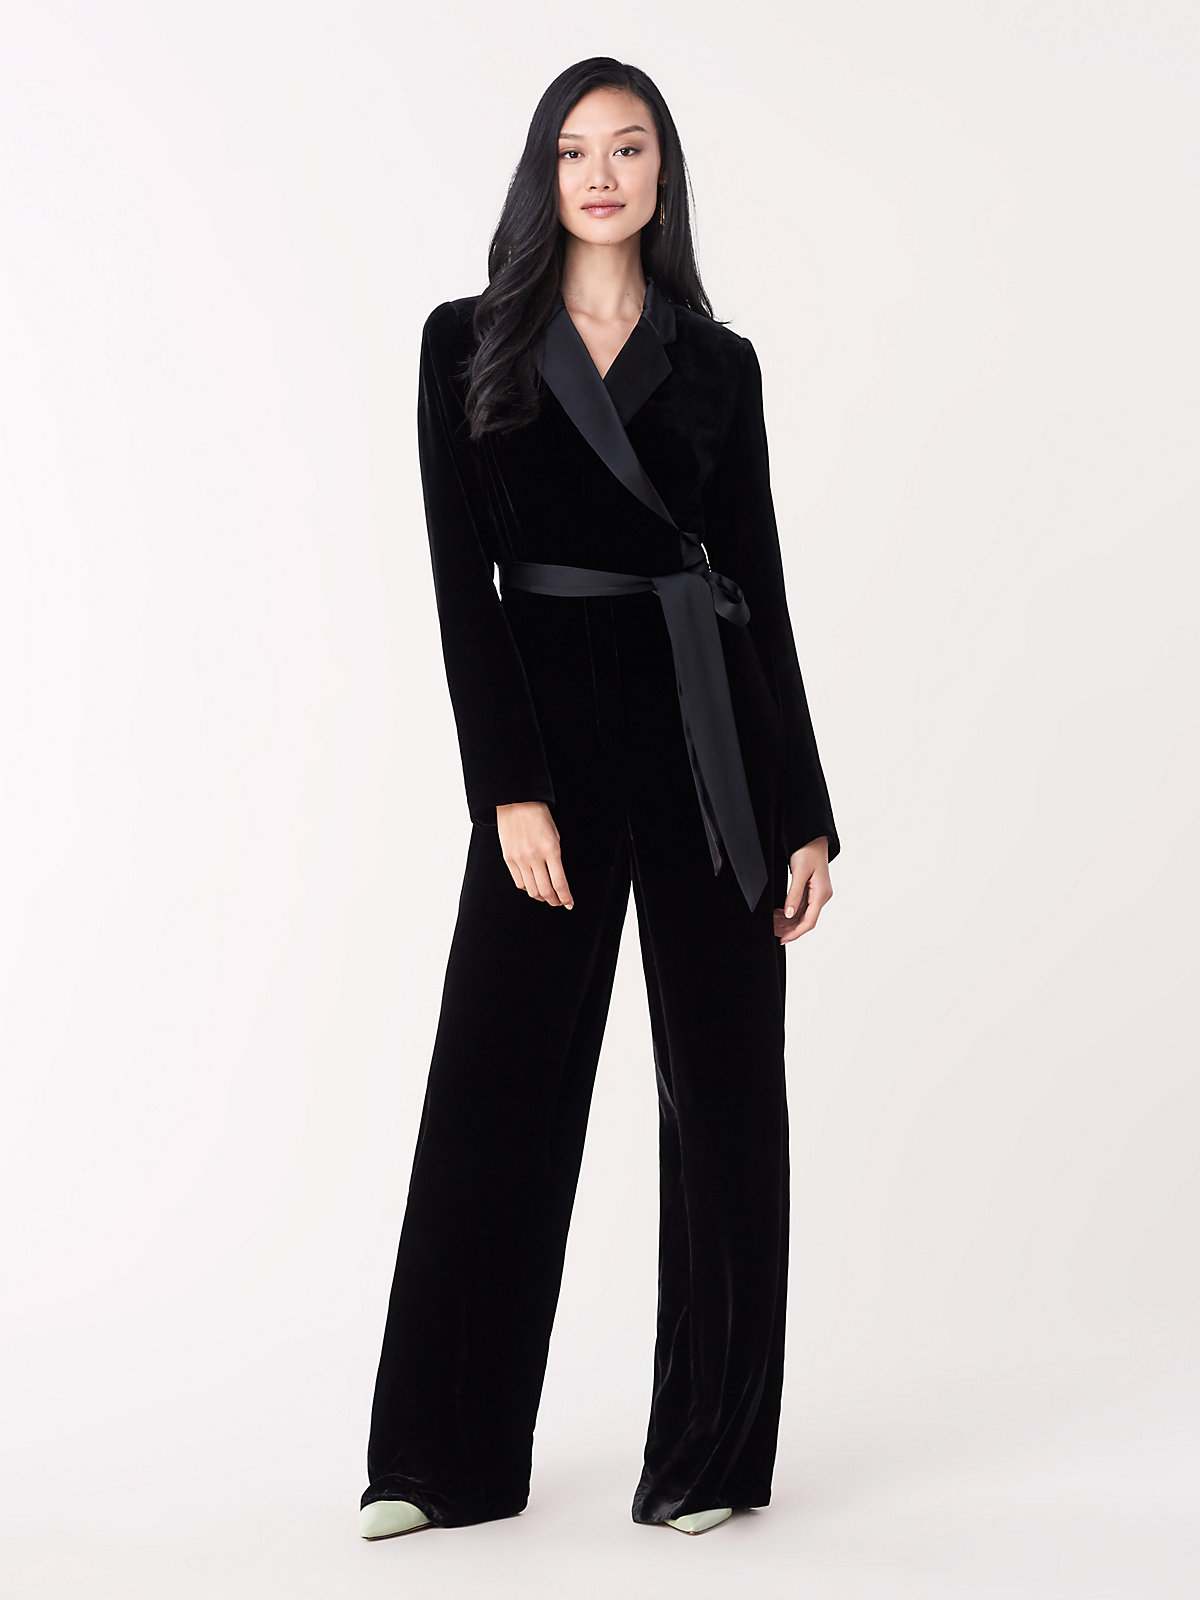 This velvet wedding jumpsuit has a wrap top adorned with a notched lapel and falls into a flattering wide-leg pant.